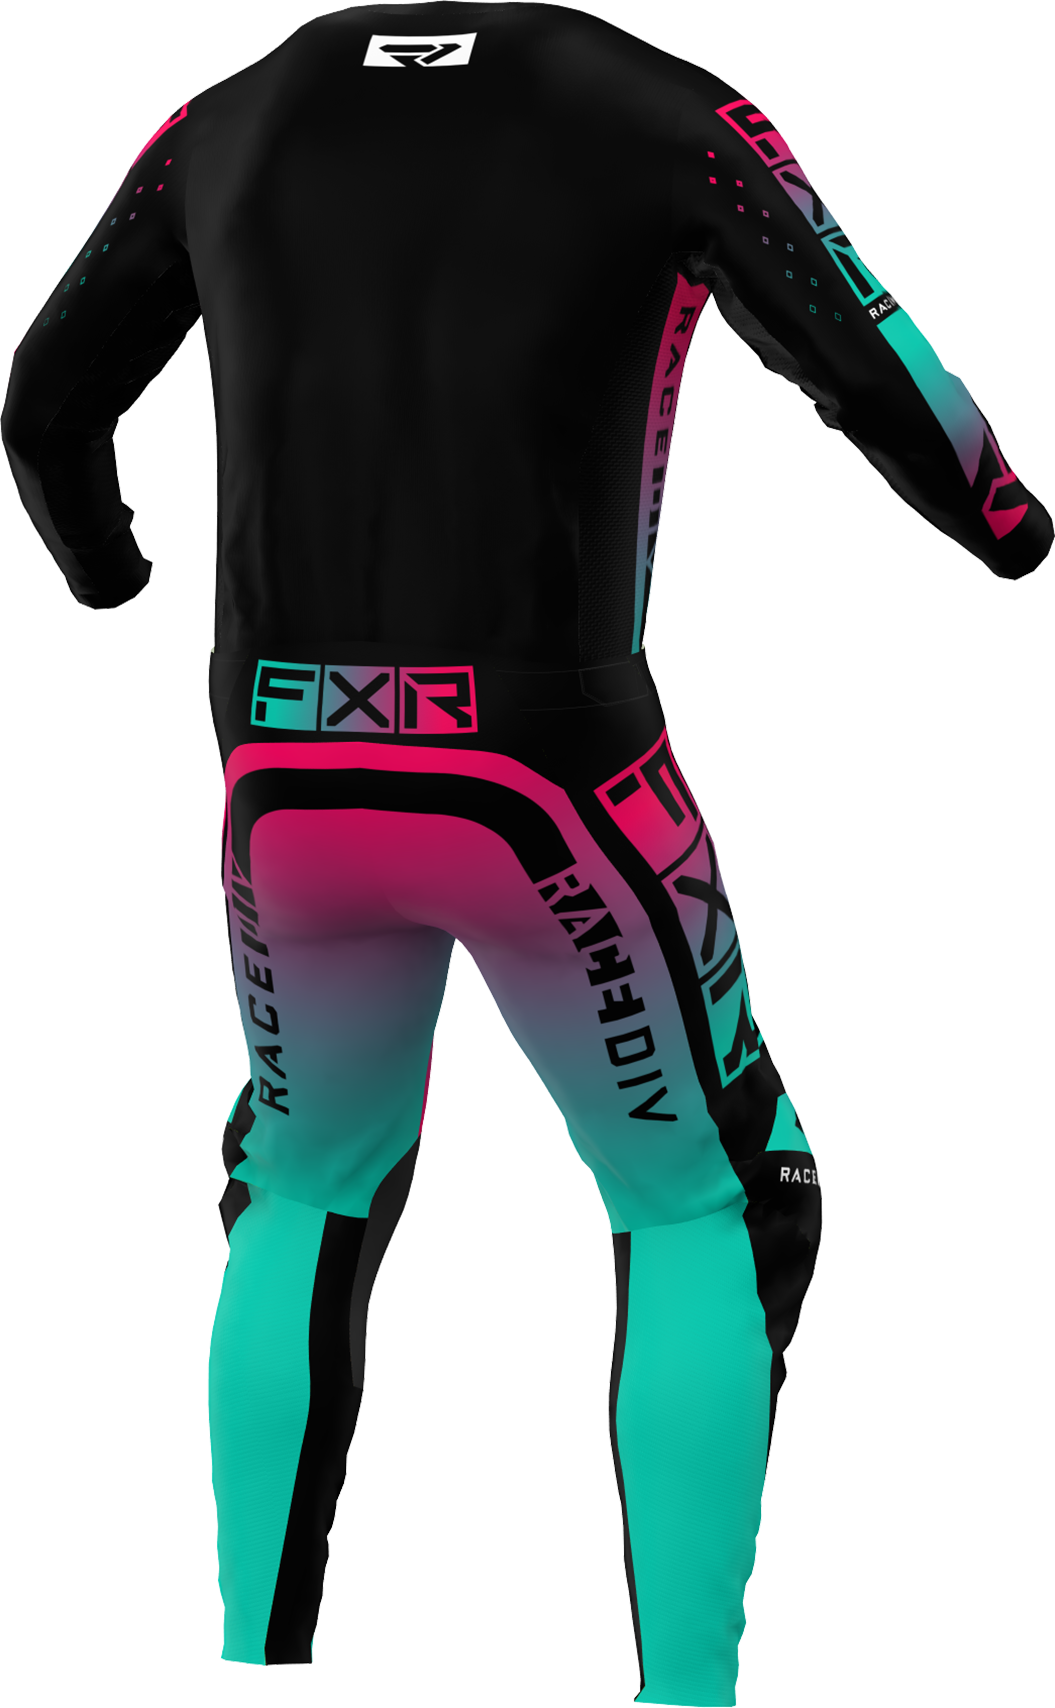 A 3D image of FXR's Podium Pro MX Jersey and Pant in Minty Re-Fresh/Black colorway